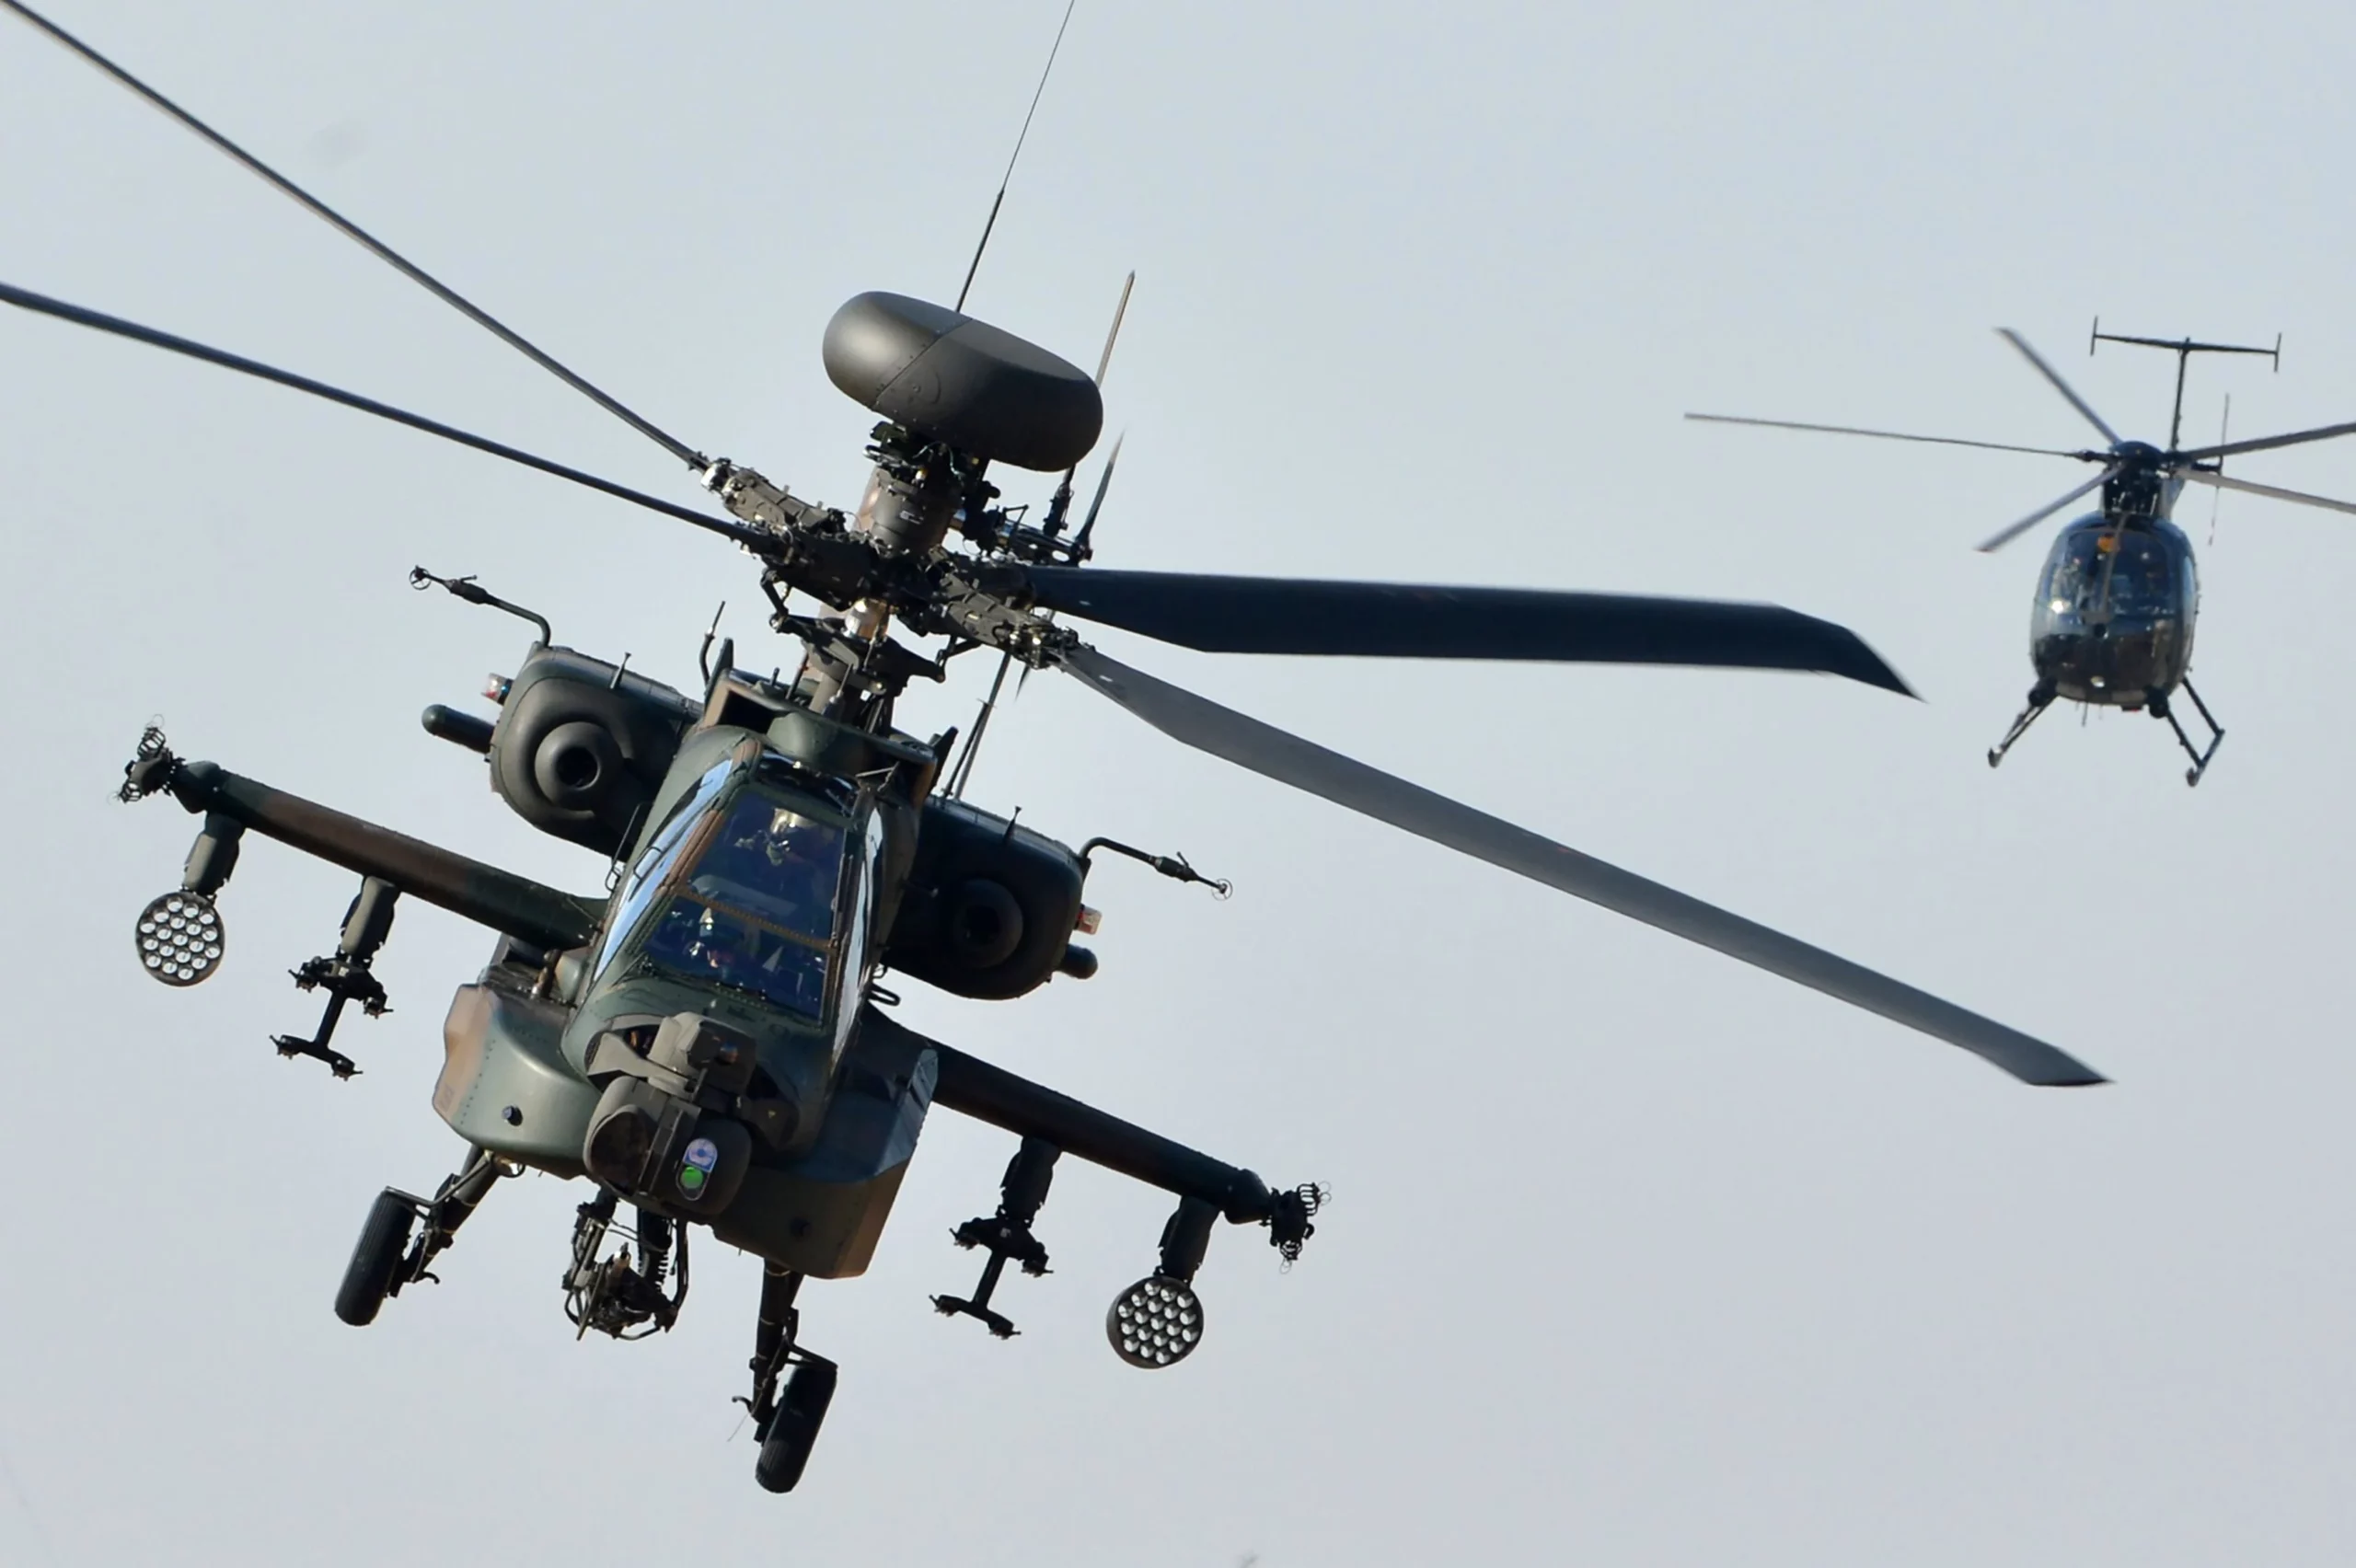 An AH-64 Apache attack helicopter.